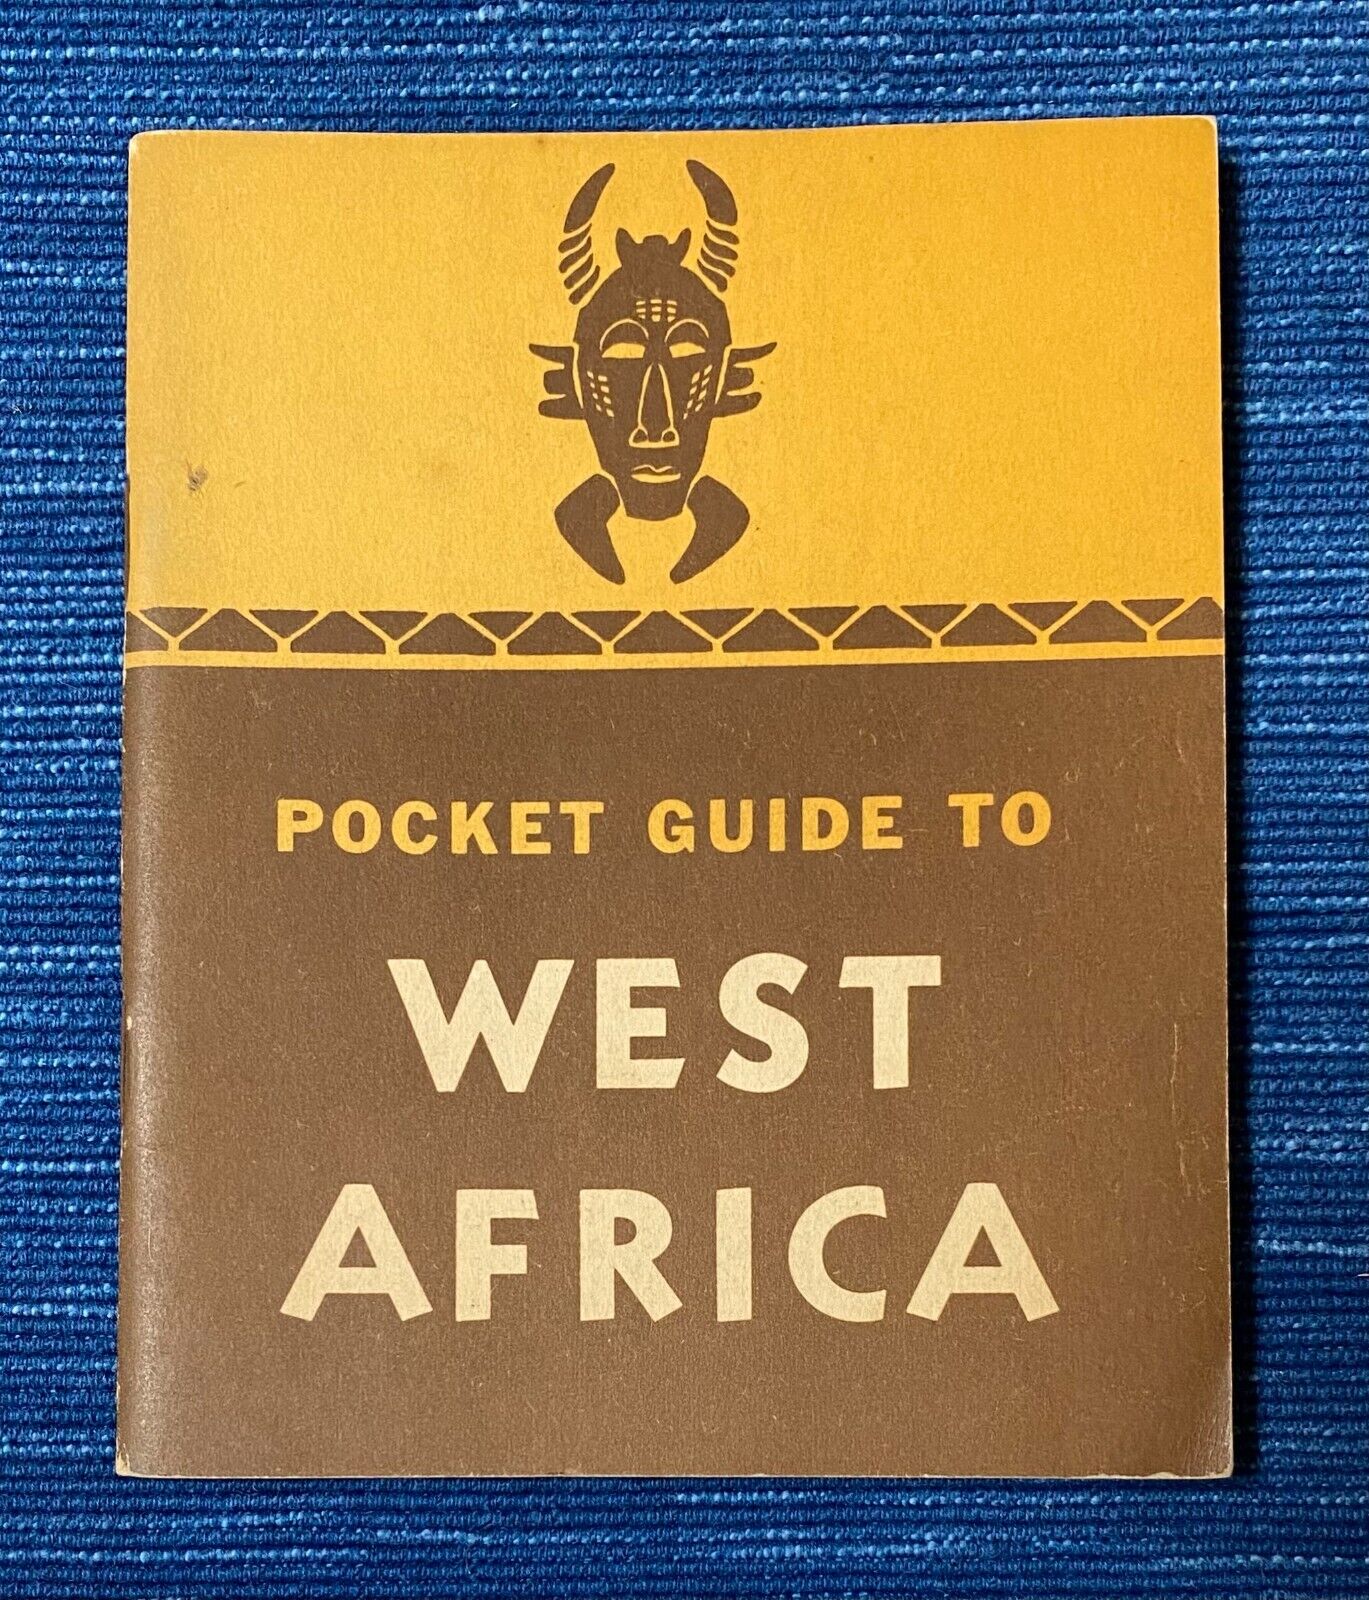 US Army Pocket Guide To West Africa War & Navy Department Vtg 1943 WWII Booklet